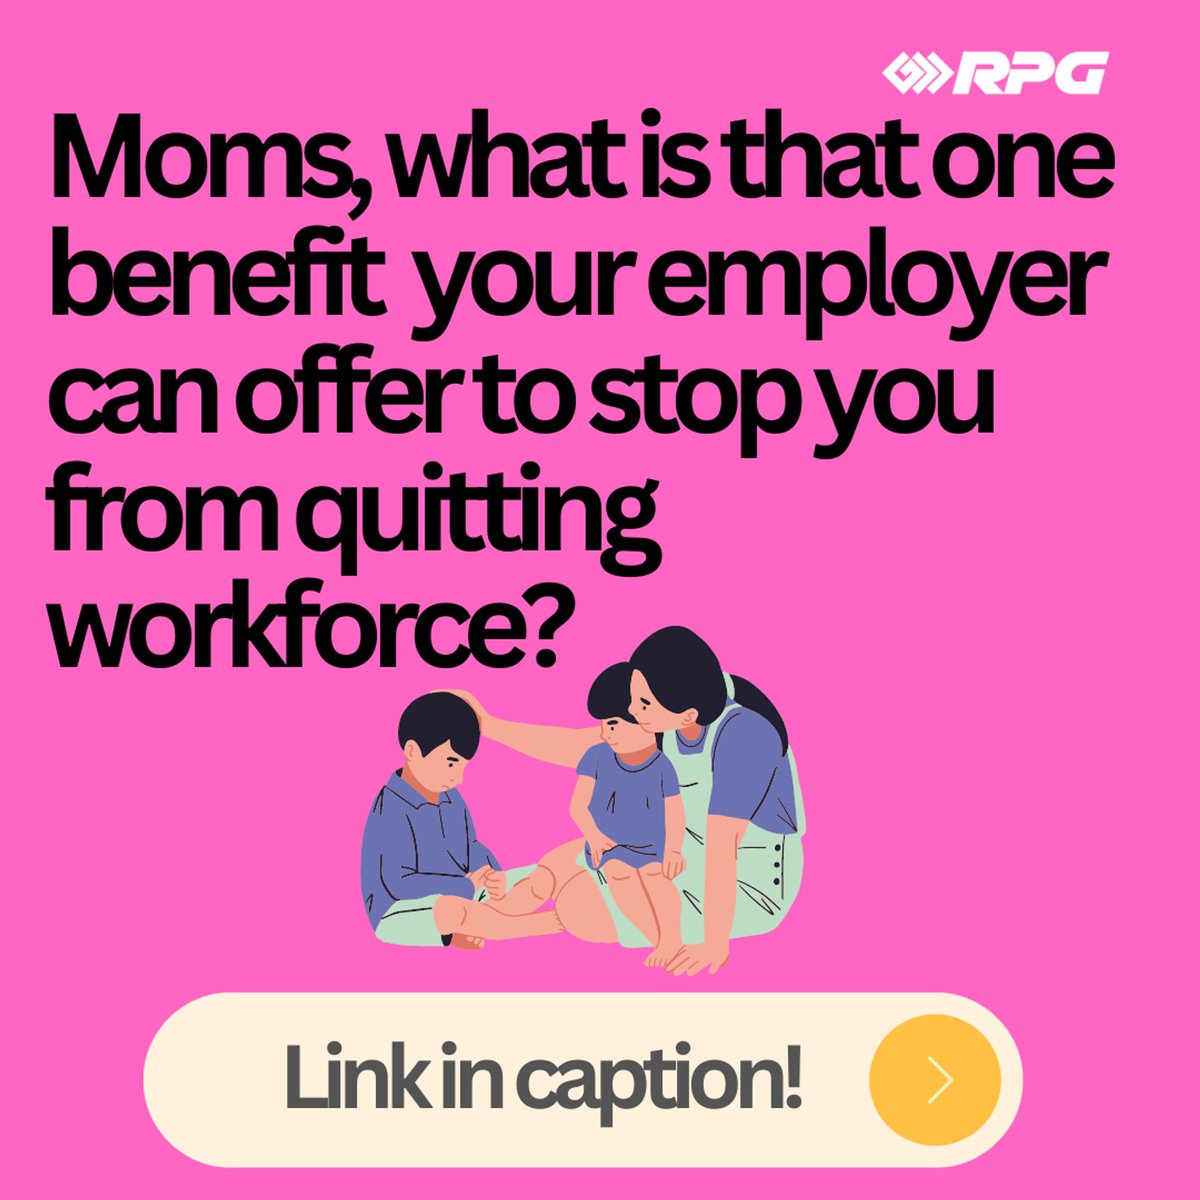 ⚡️Attention all powerhouse moms! Imagine this: What's the ultimate game-changer your employer could offer to keep you on their team? Let's dream big and share our thoughts in this survey link! 👇👇👇 ( bit.ly/3UhOiDo) #DreamJob #momboss #EmployeePerks 🧳